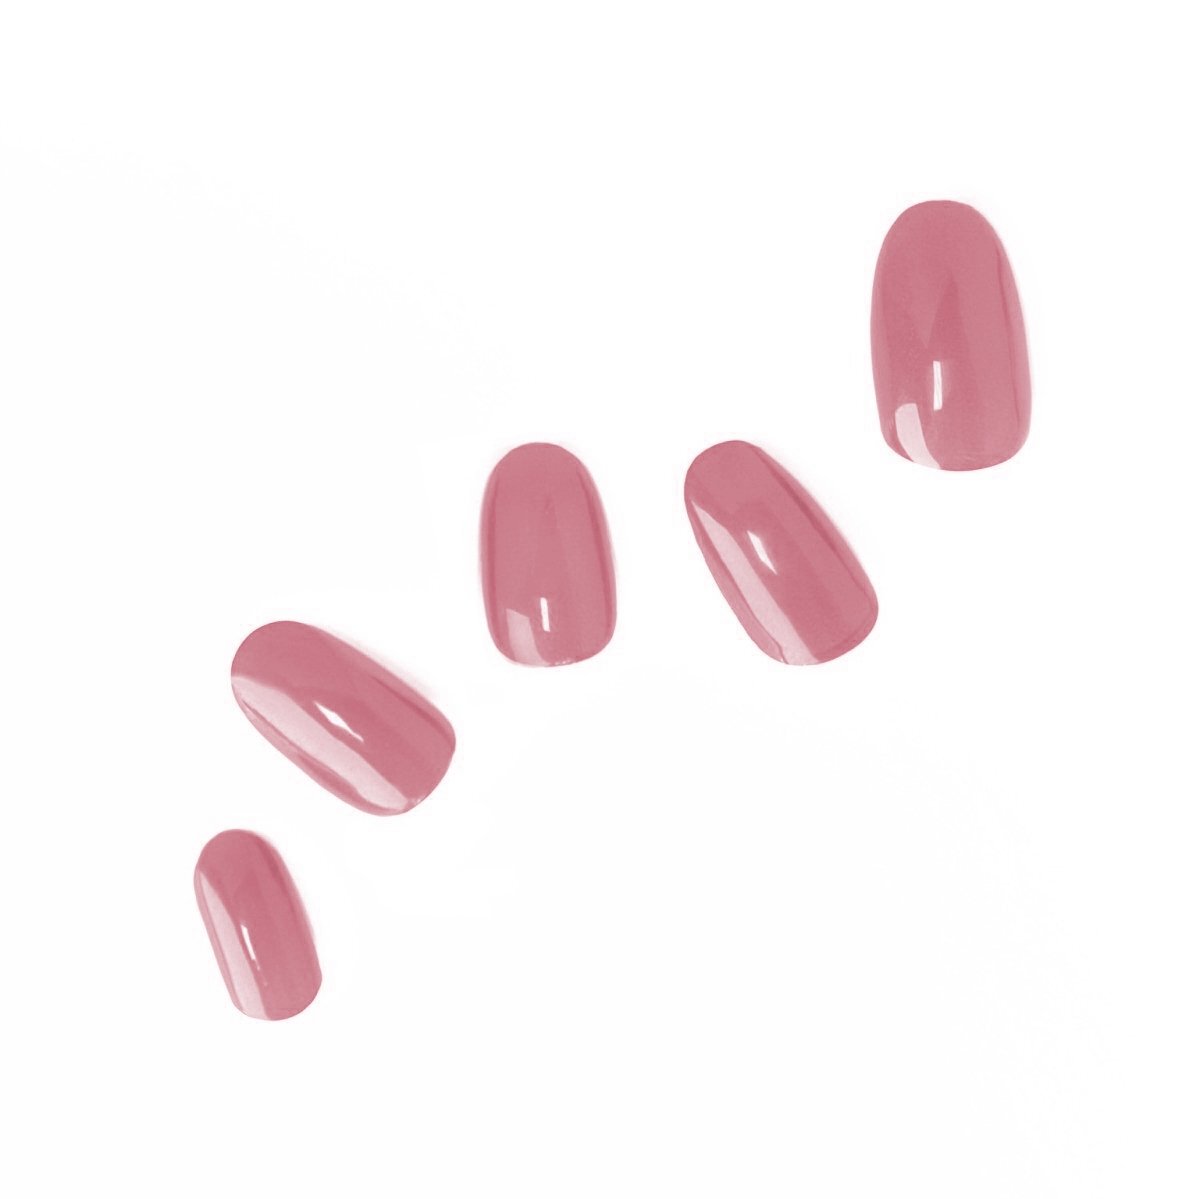 Dusty Rose Semicured Gel Nail Wraps - Pretty Fab Nails